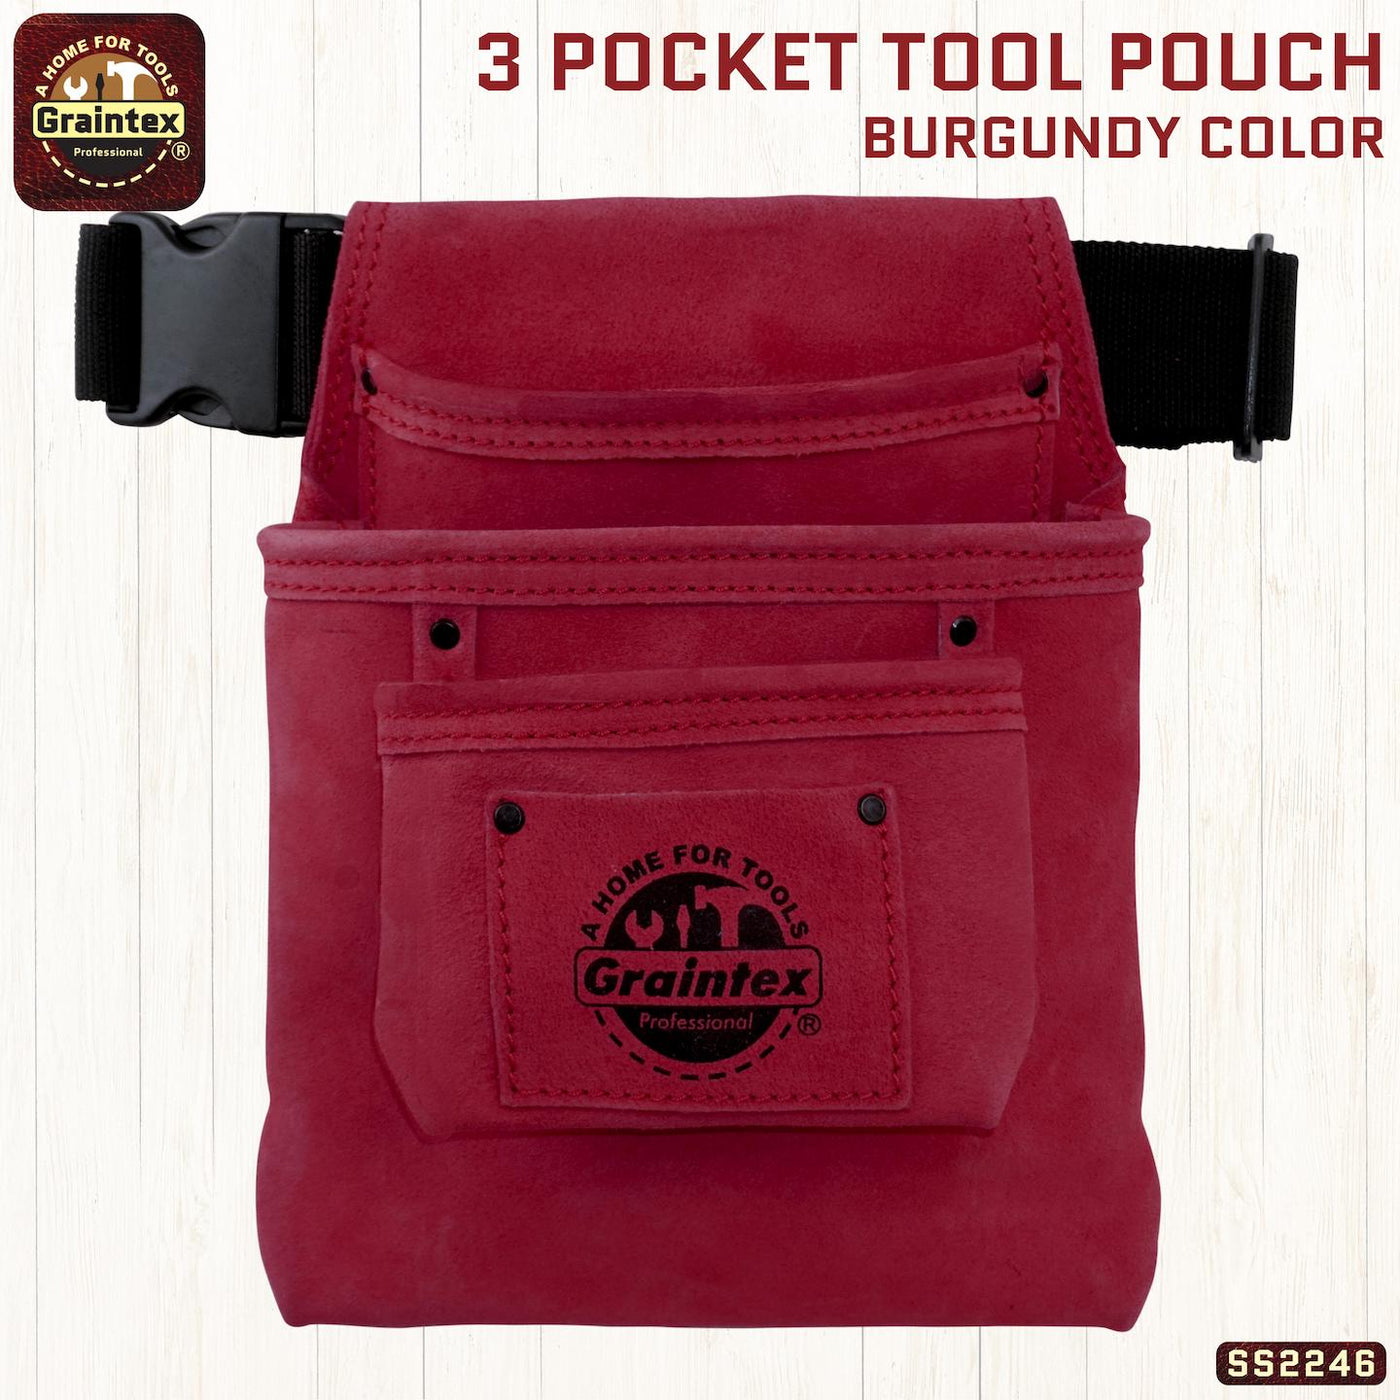 SS2246 :: 3 Pocket Nail & Tool Pouch Burgundy Color Suede Leather with Belt